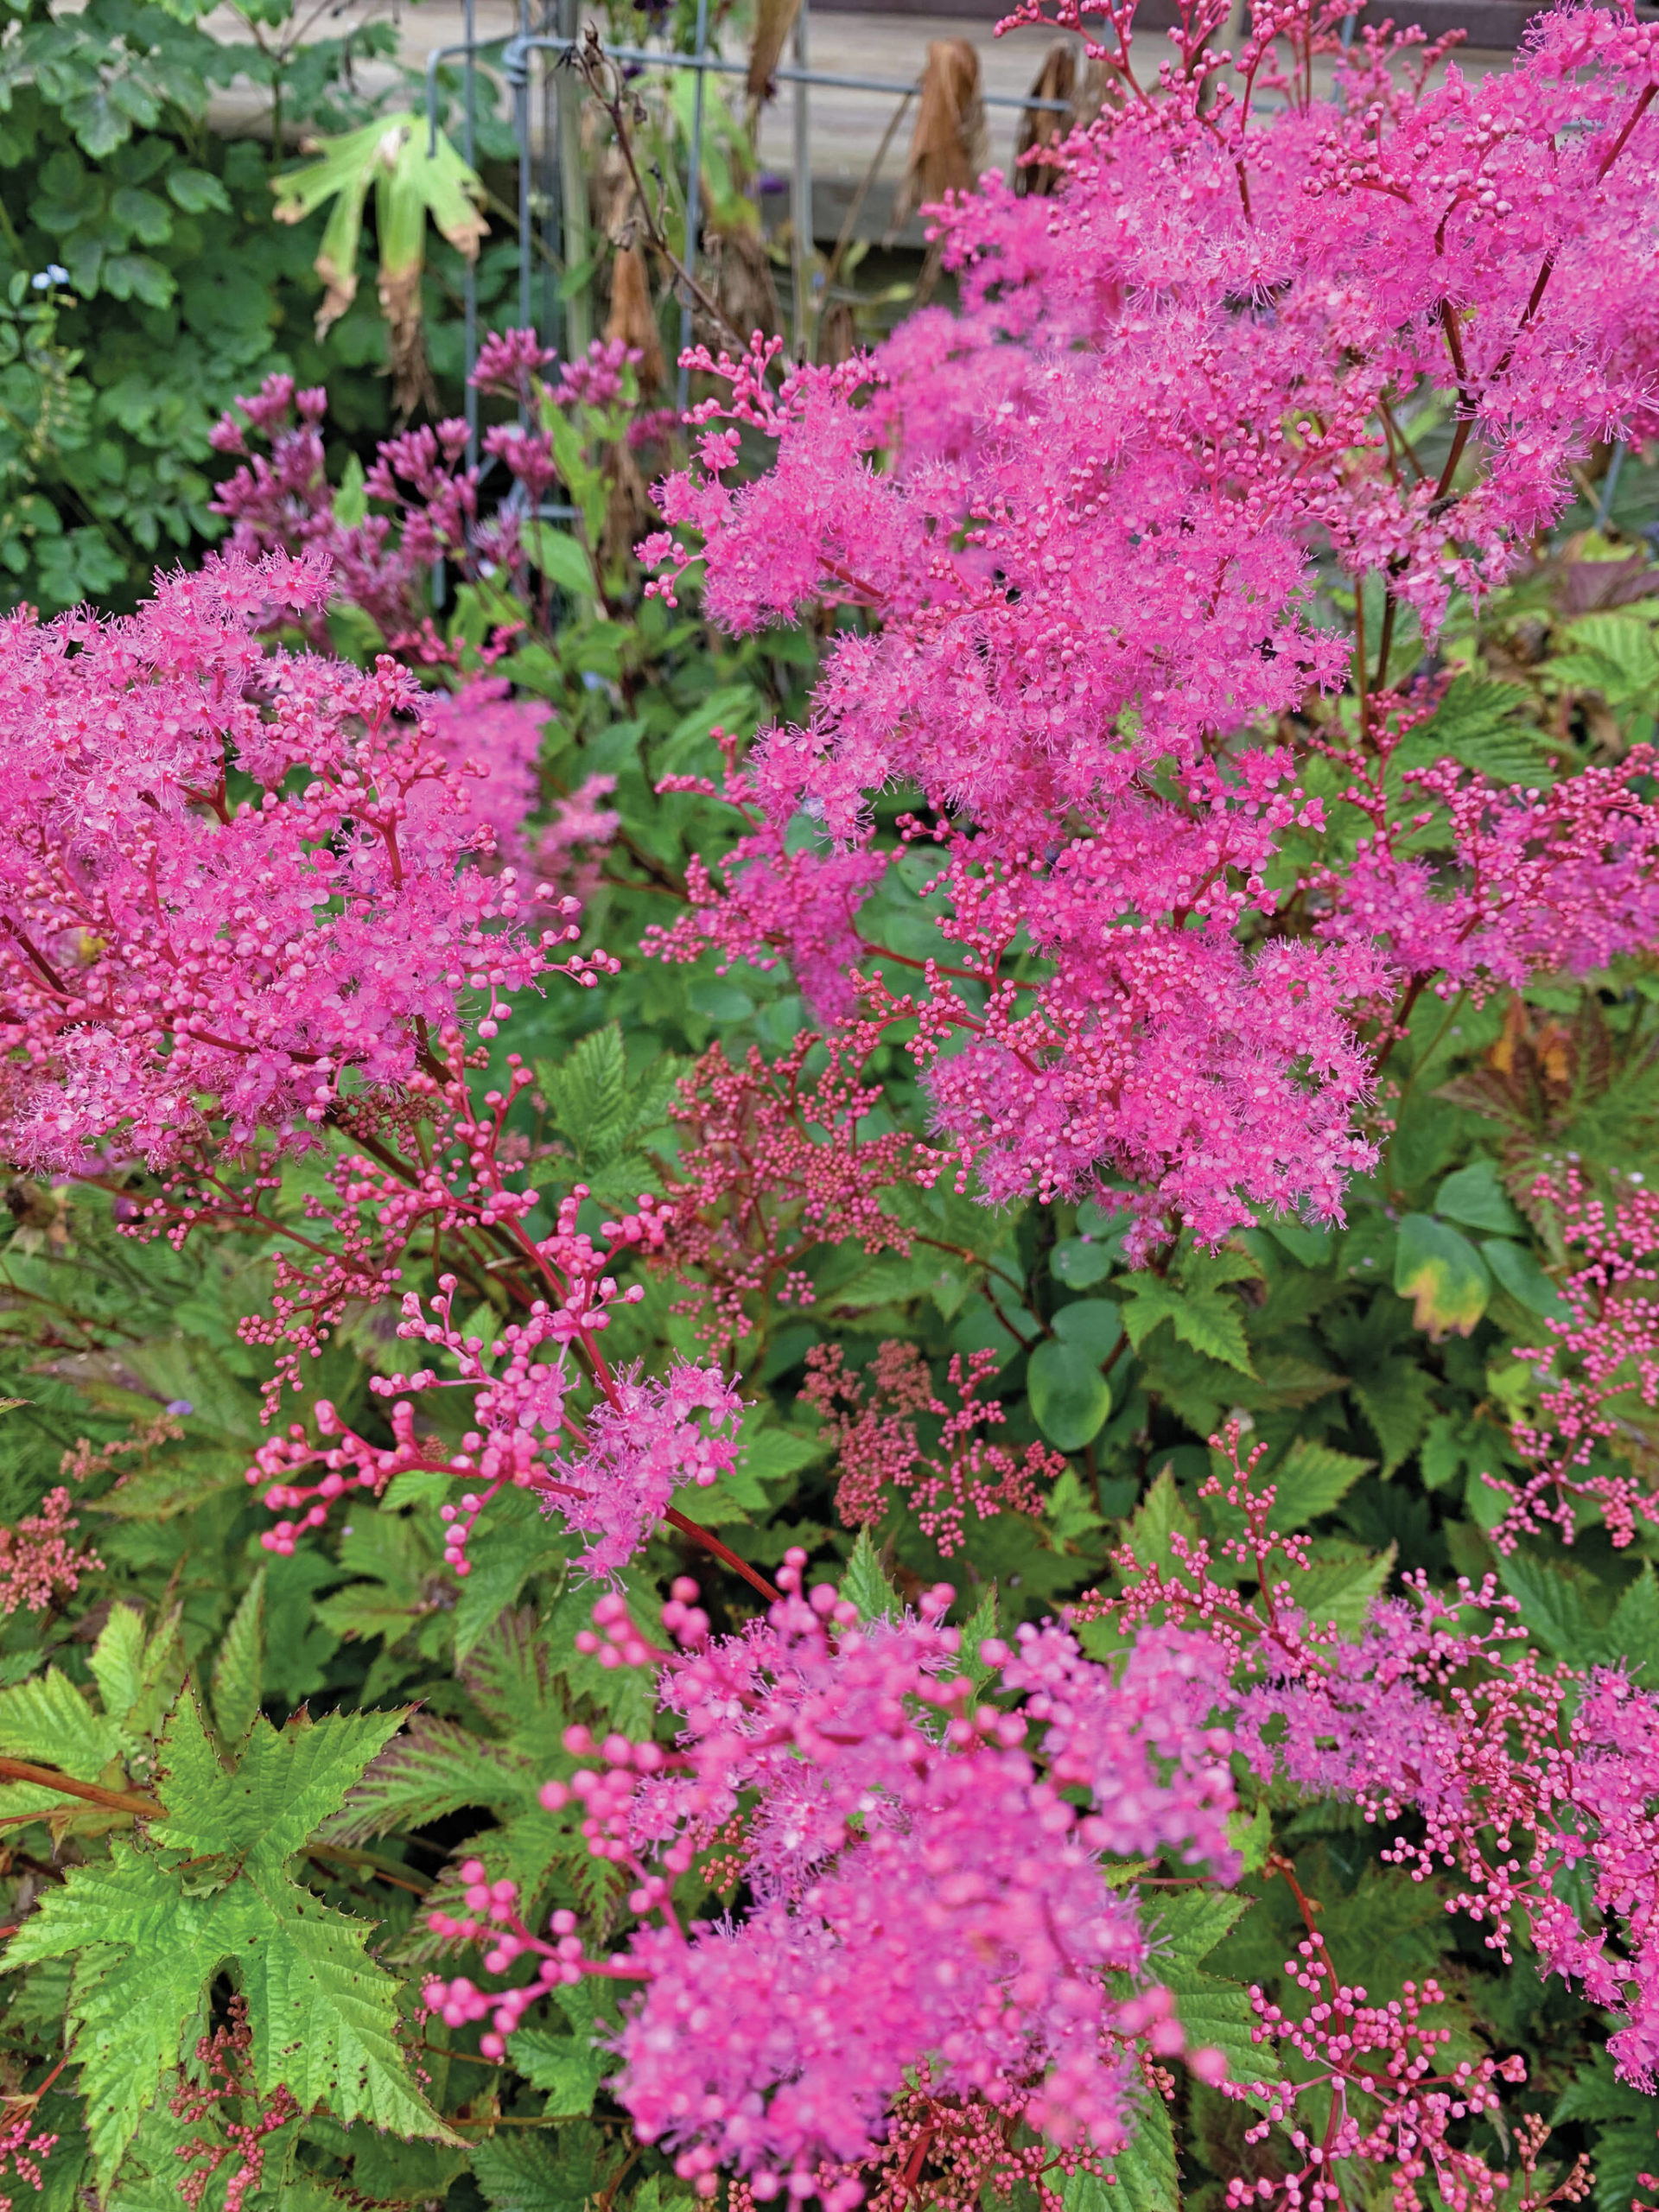 Filipendula kehome is just starting to offer fall color in the garden.